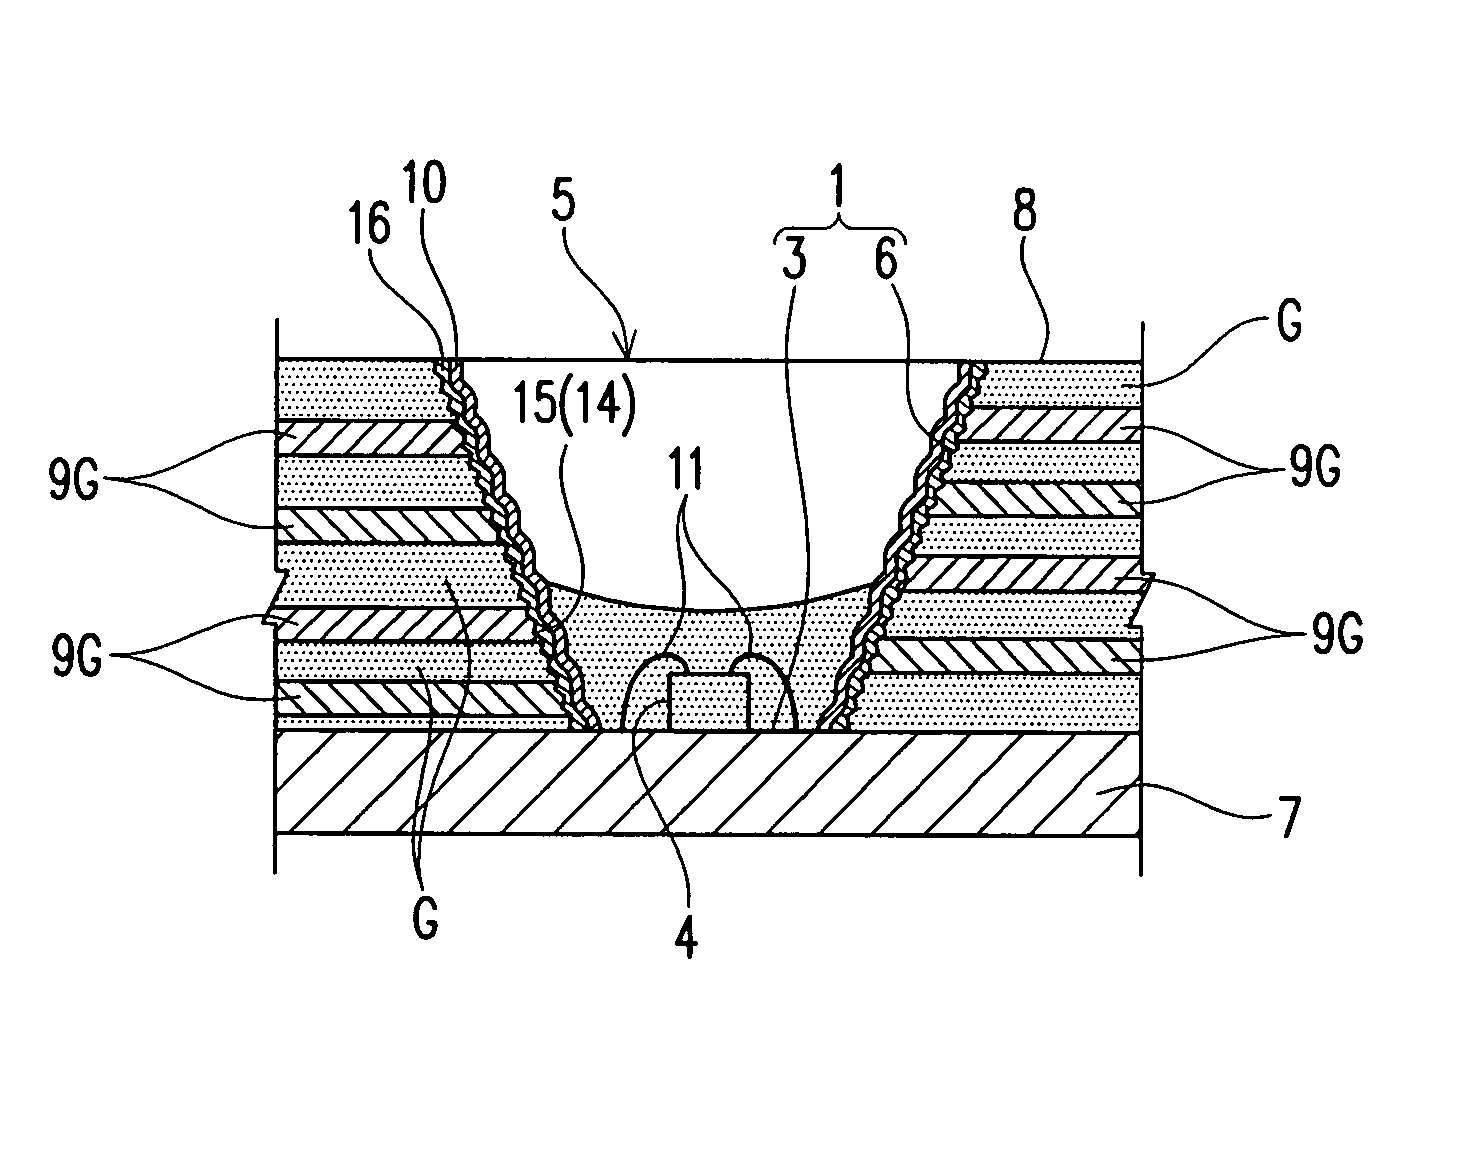 Light emitting device having a package formed with fibrous fillers